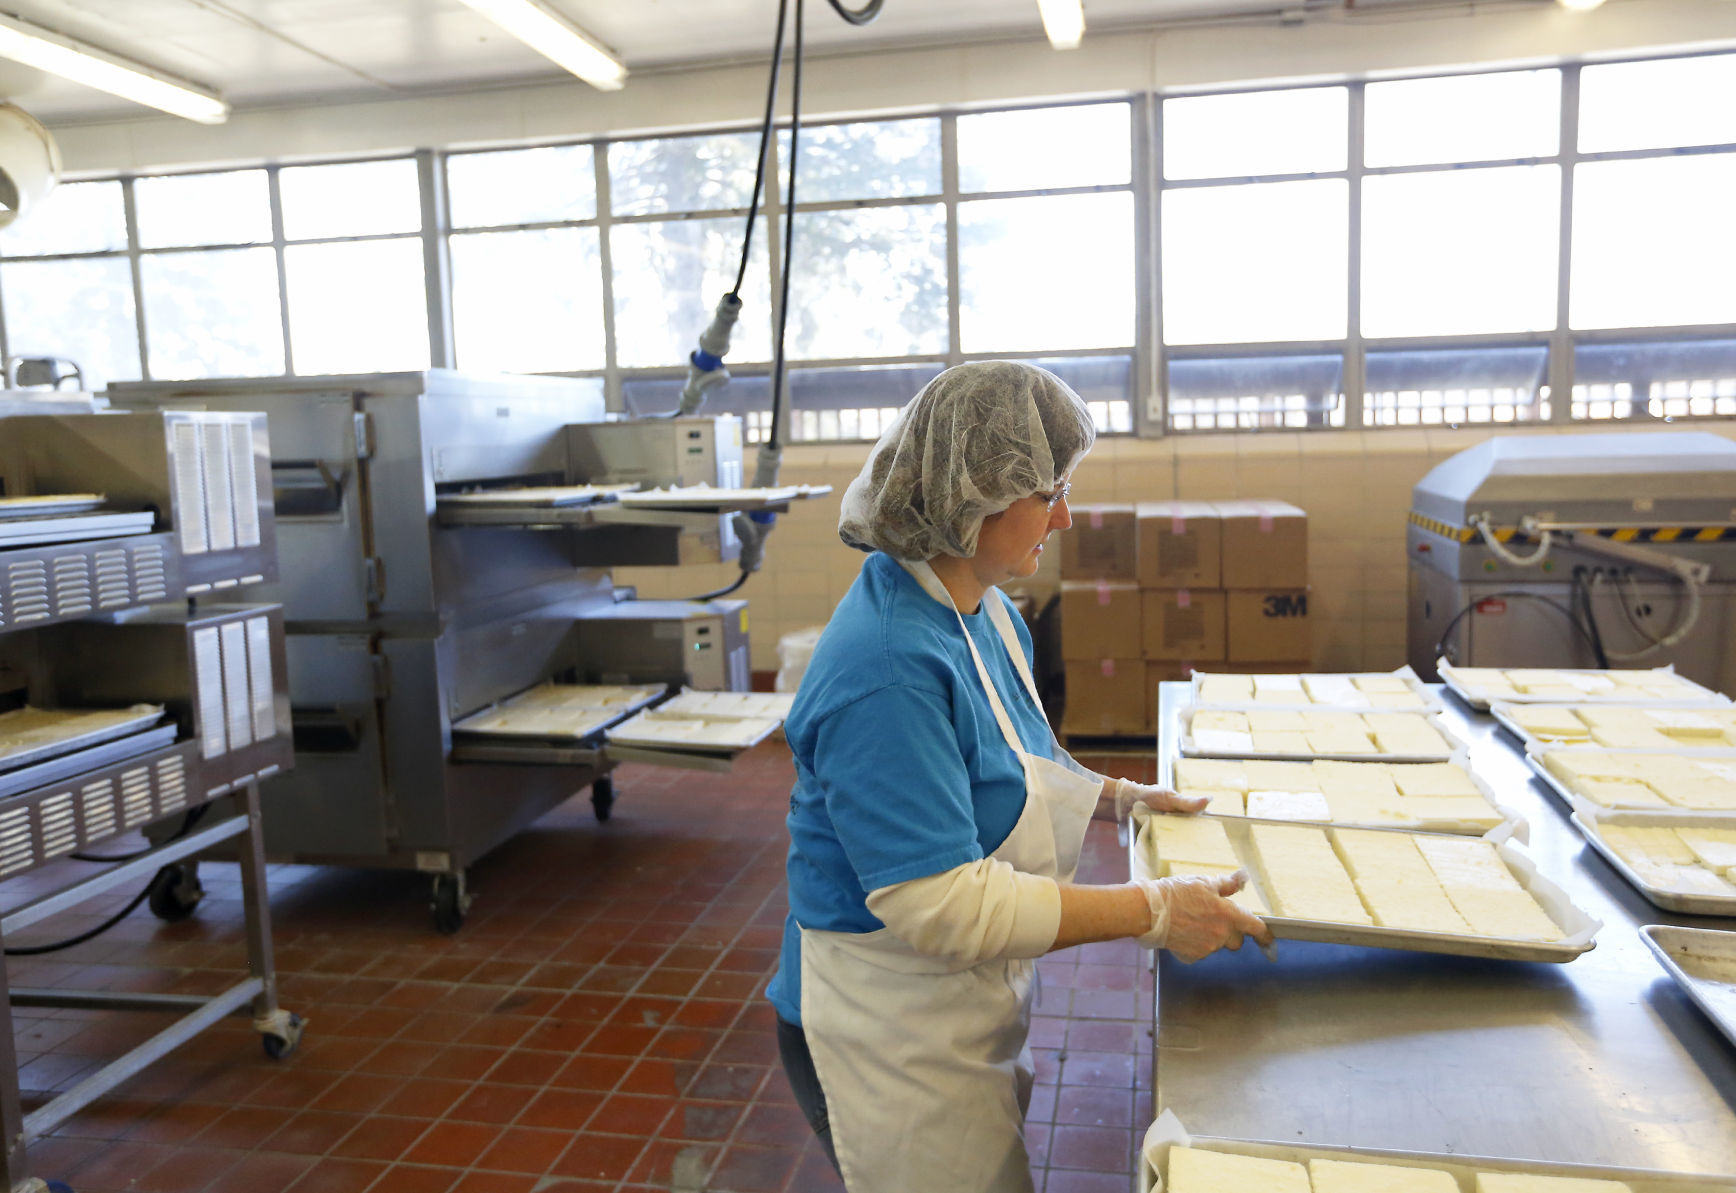 Cathy LaMore gets ready to put cheese in the oven at Carr Valley Cheese. The company’s Fennimore, Wis., facility has been open since 2005. It employs 10 and has increased production through several efficiencies.    PHOTO CREDIT: EILEEN MESLAR